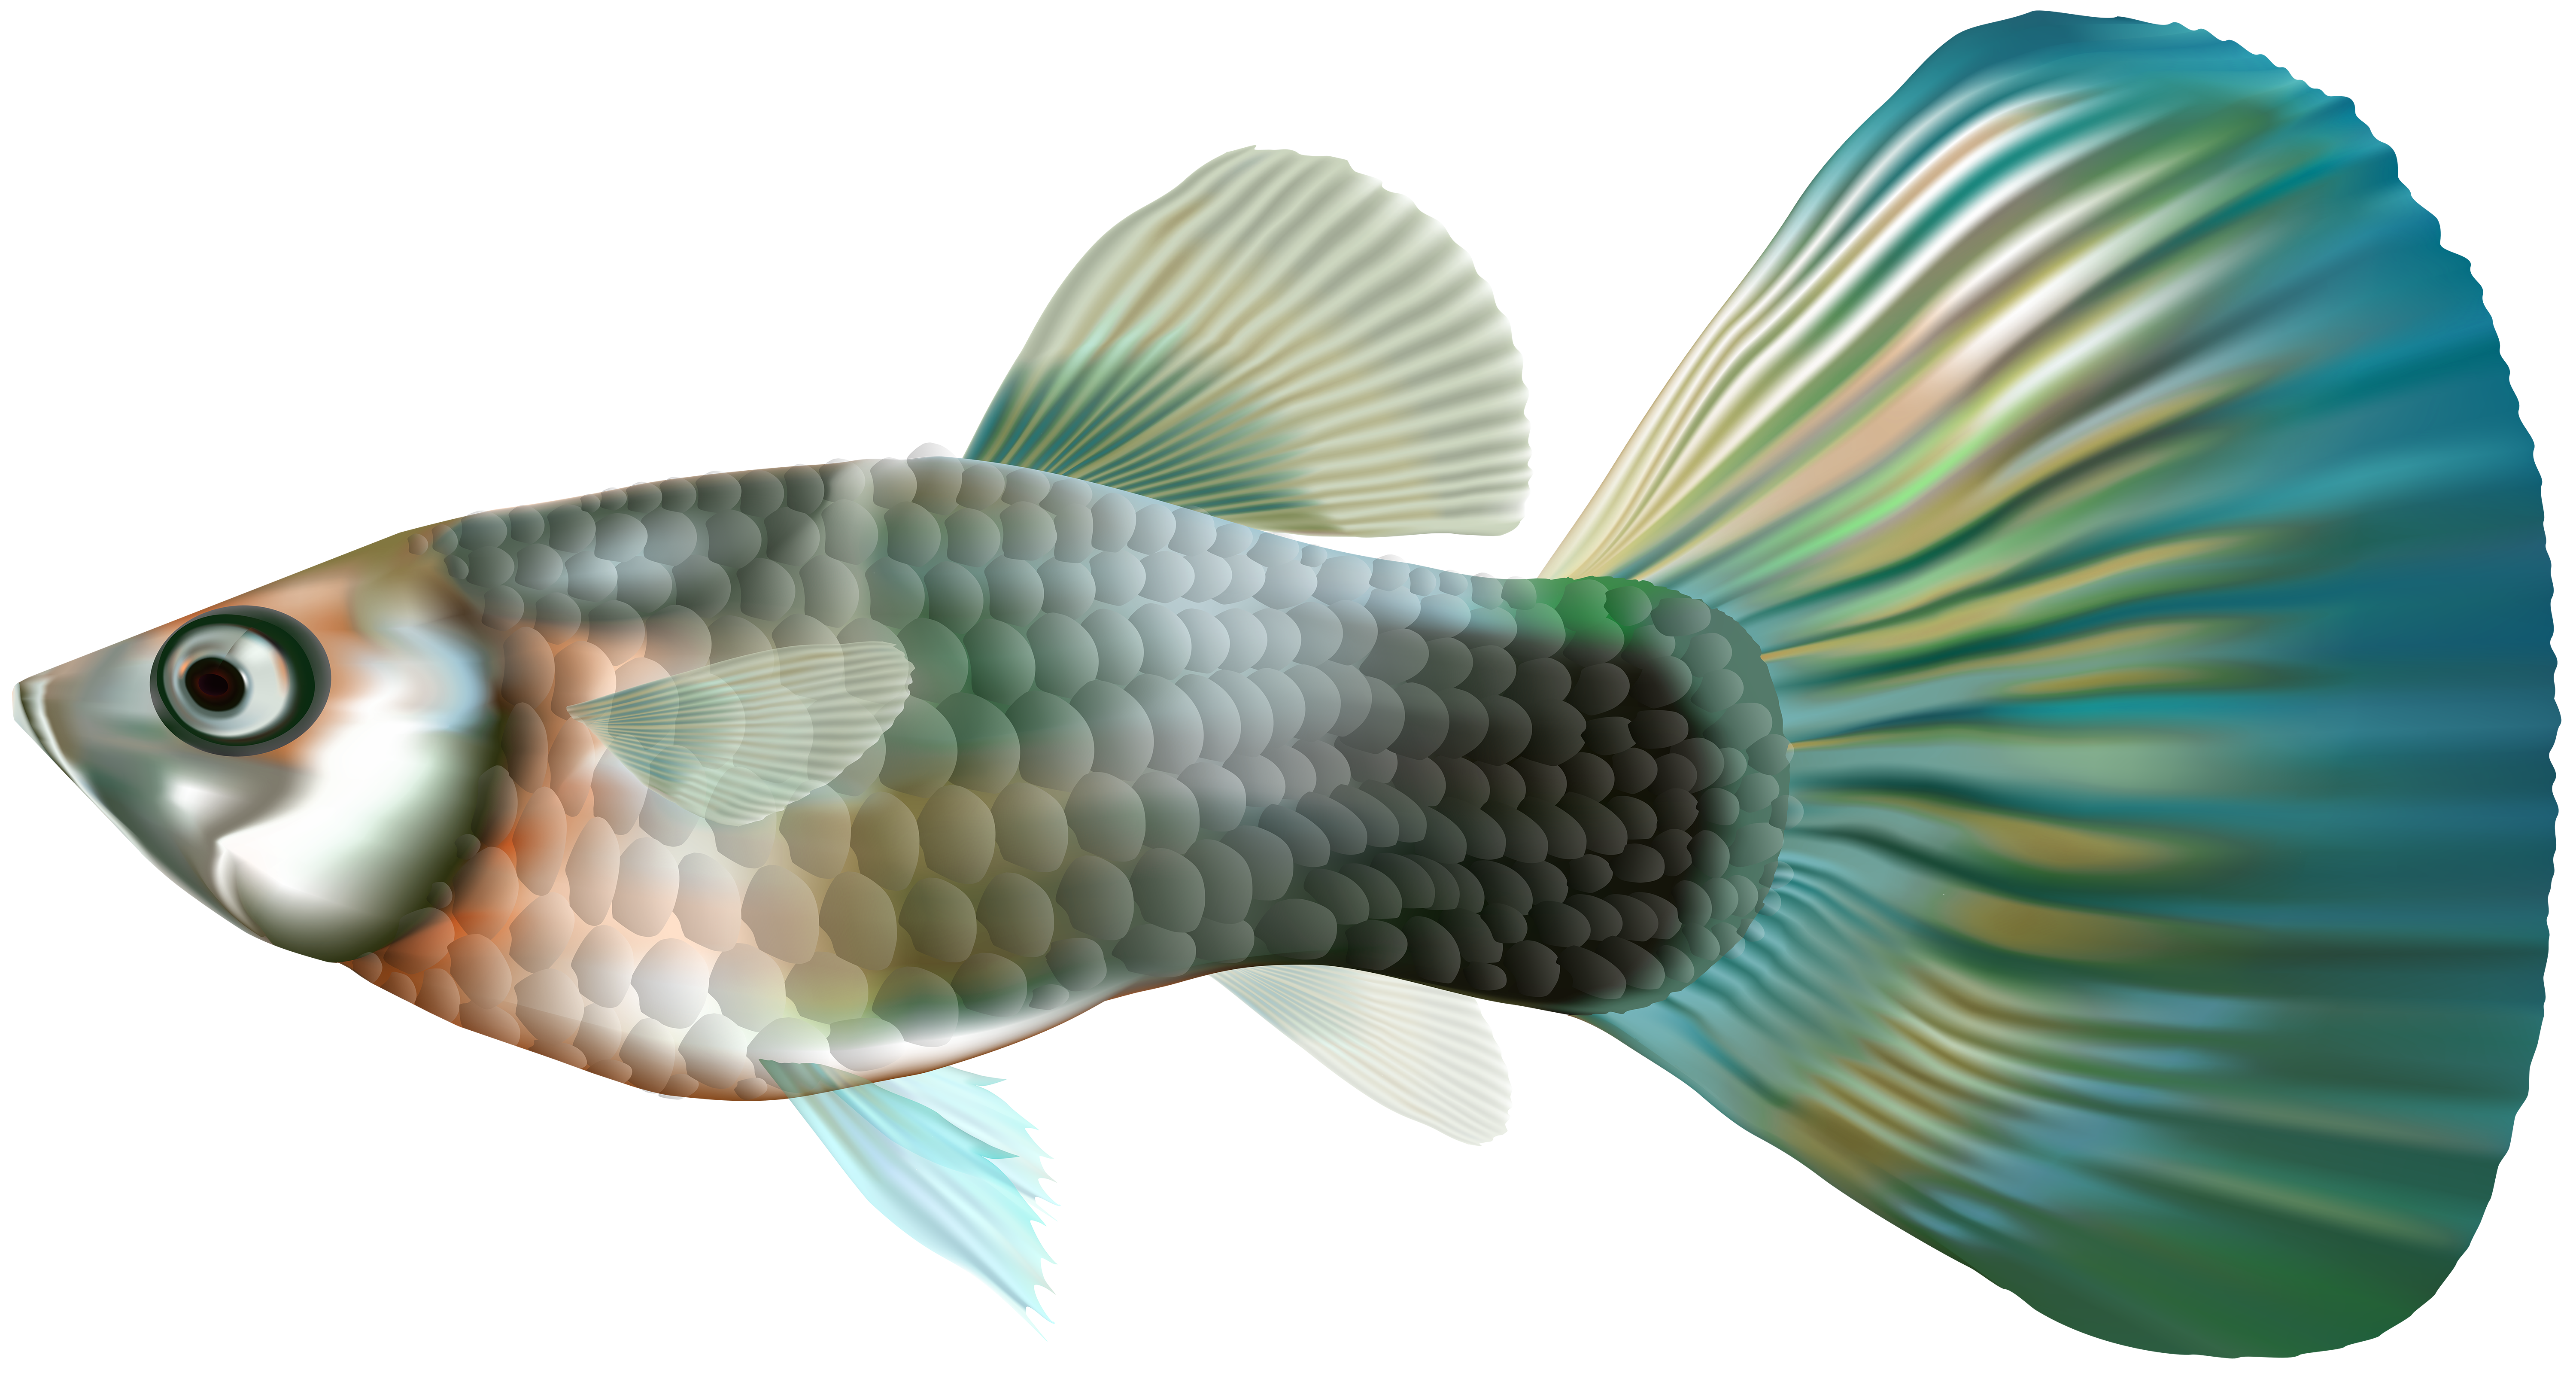 https://gallery.yopriceville.com/var/albums/Free-Clipart-Pictures/Underwater/Female_Guppy_Fish_PNG_Clip_Art.png?m=1629819291